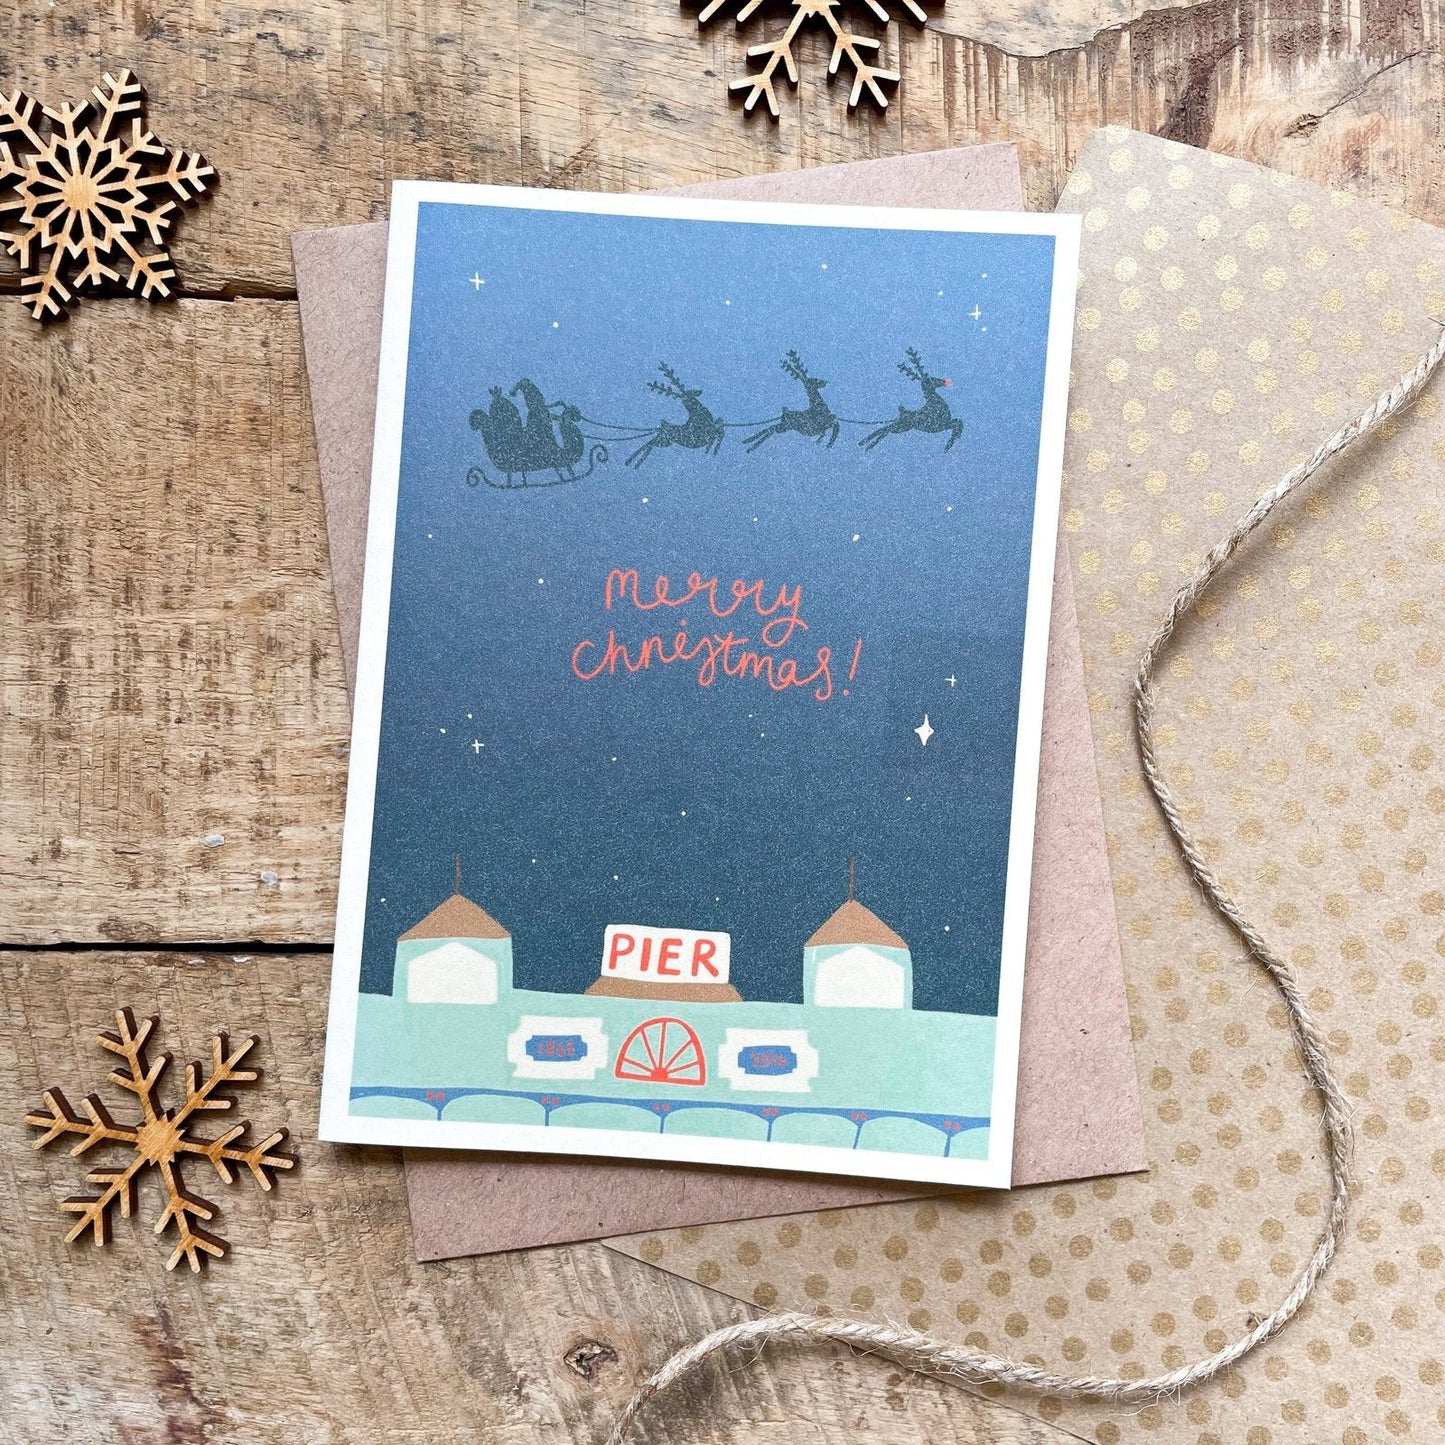 'Teignmouth Pier' Recycled Coffee Cup Christmas Card